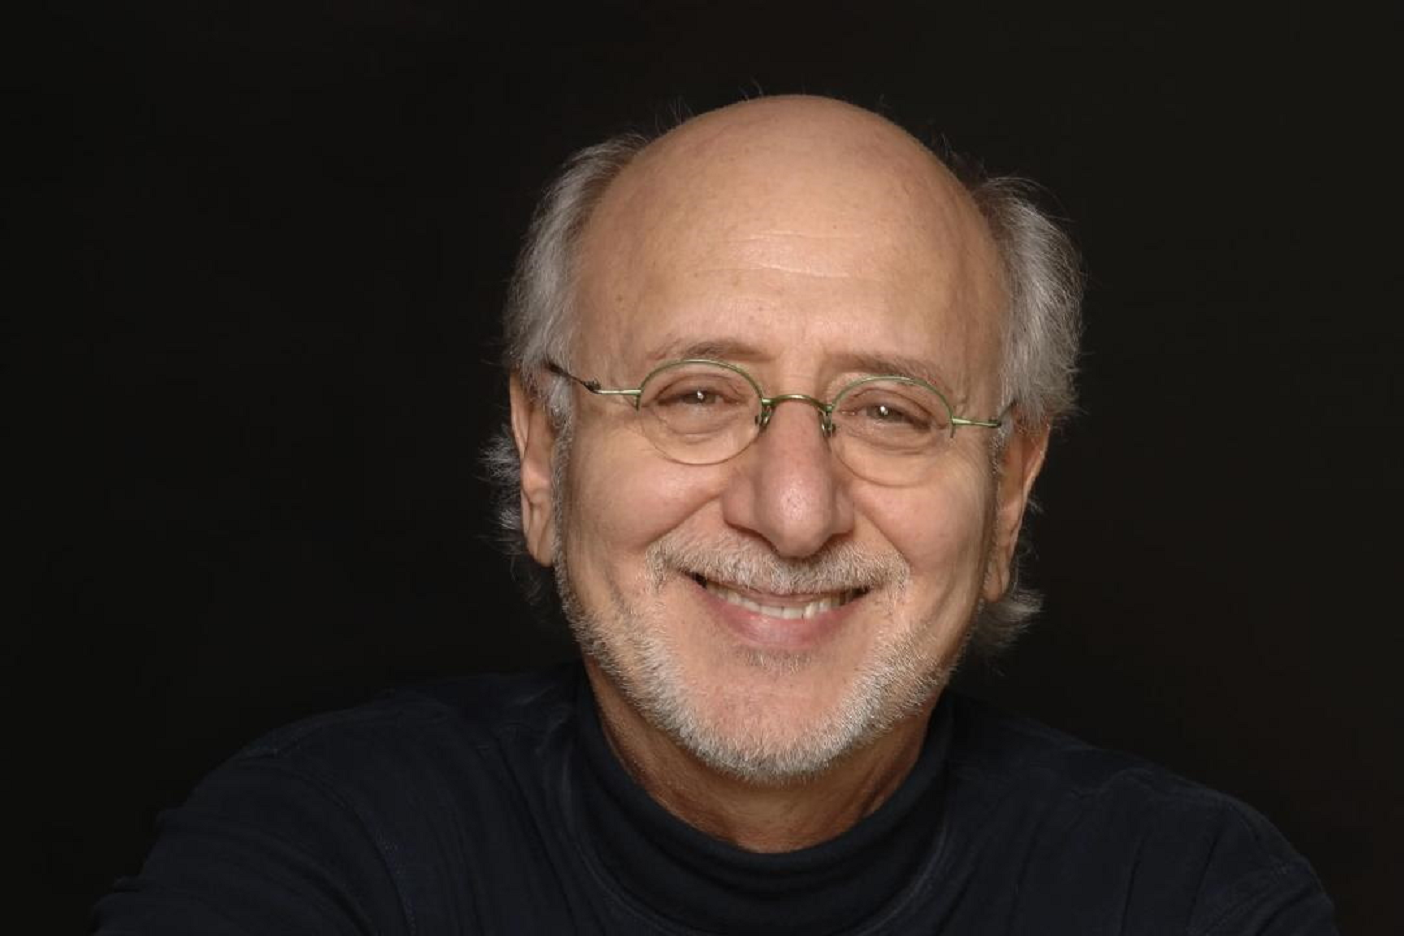 Peter Yarrow performs as part of the Troubadour Concert Series